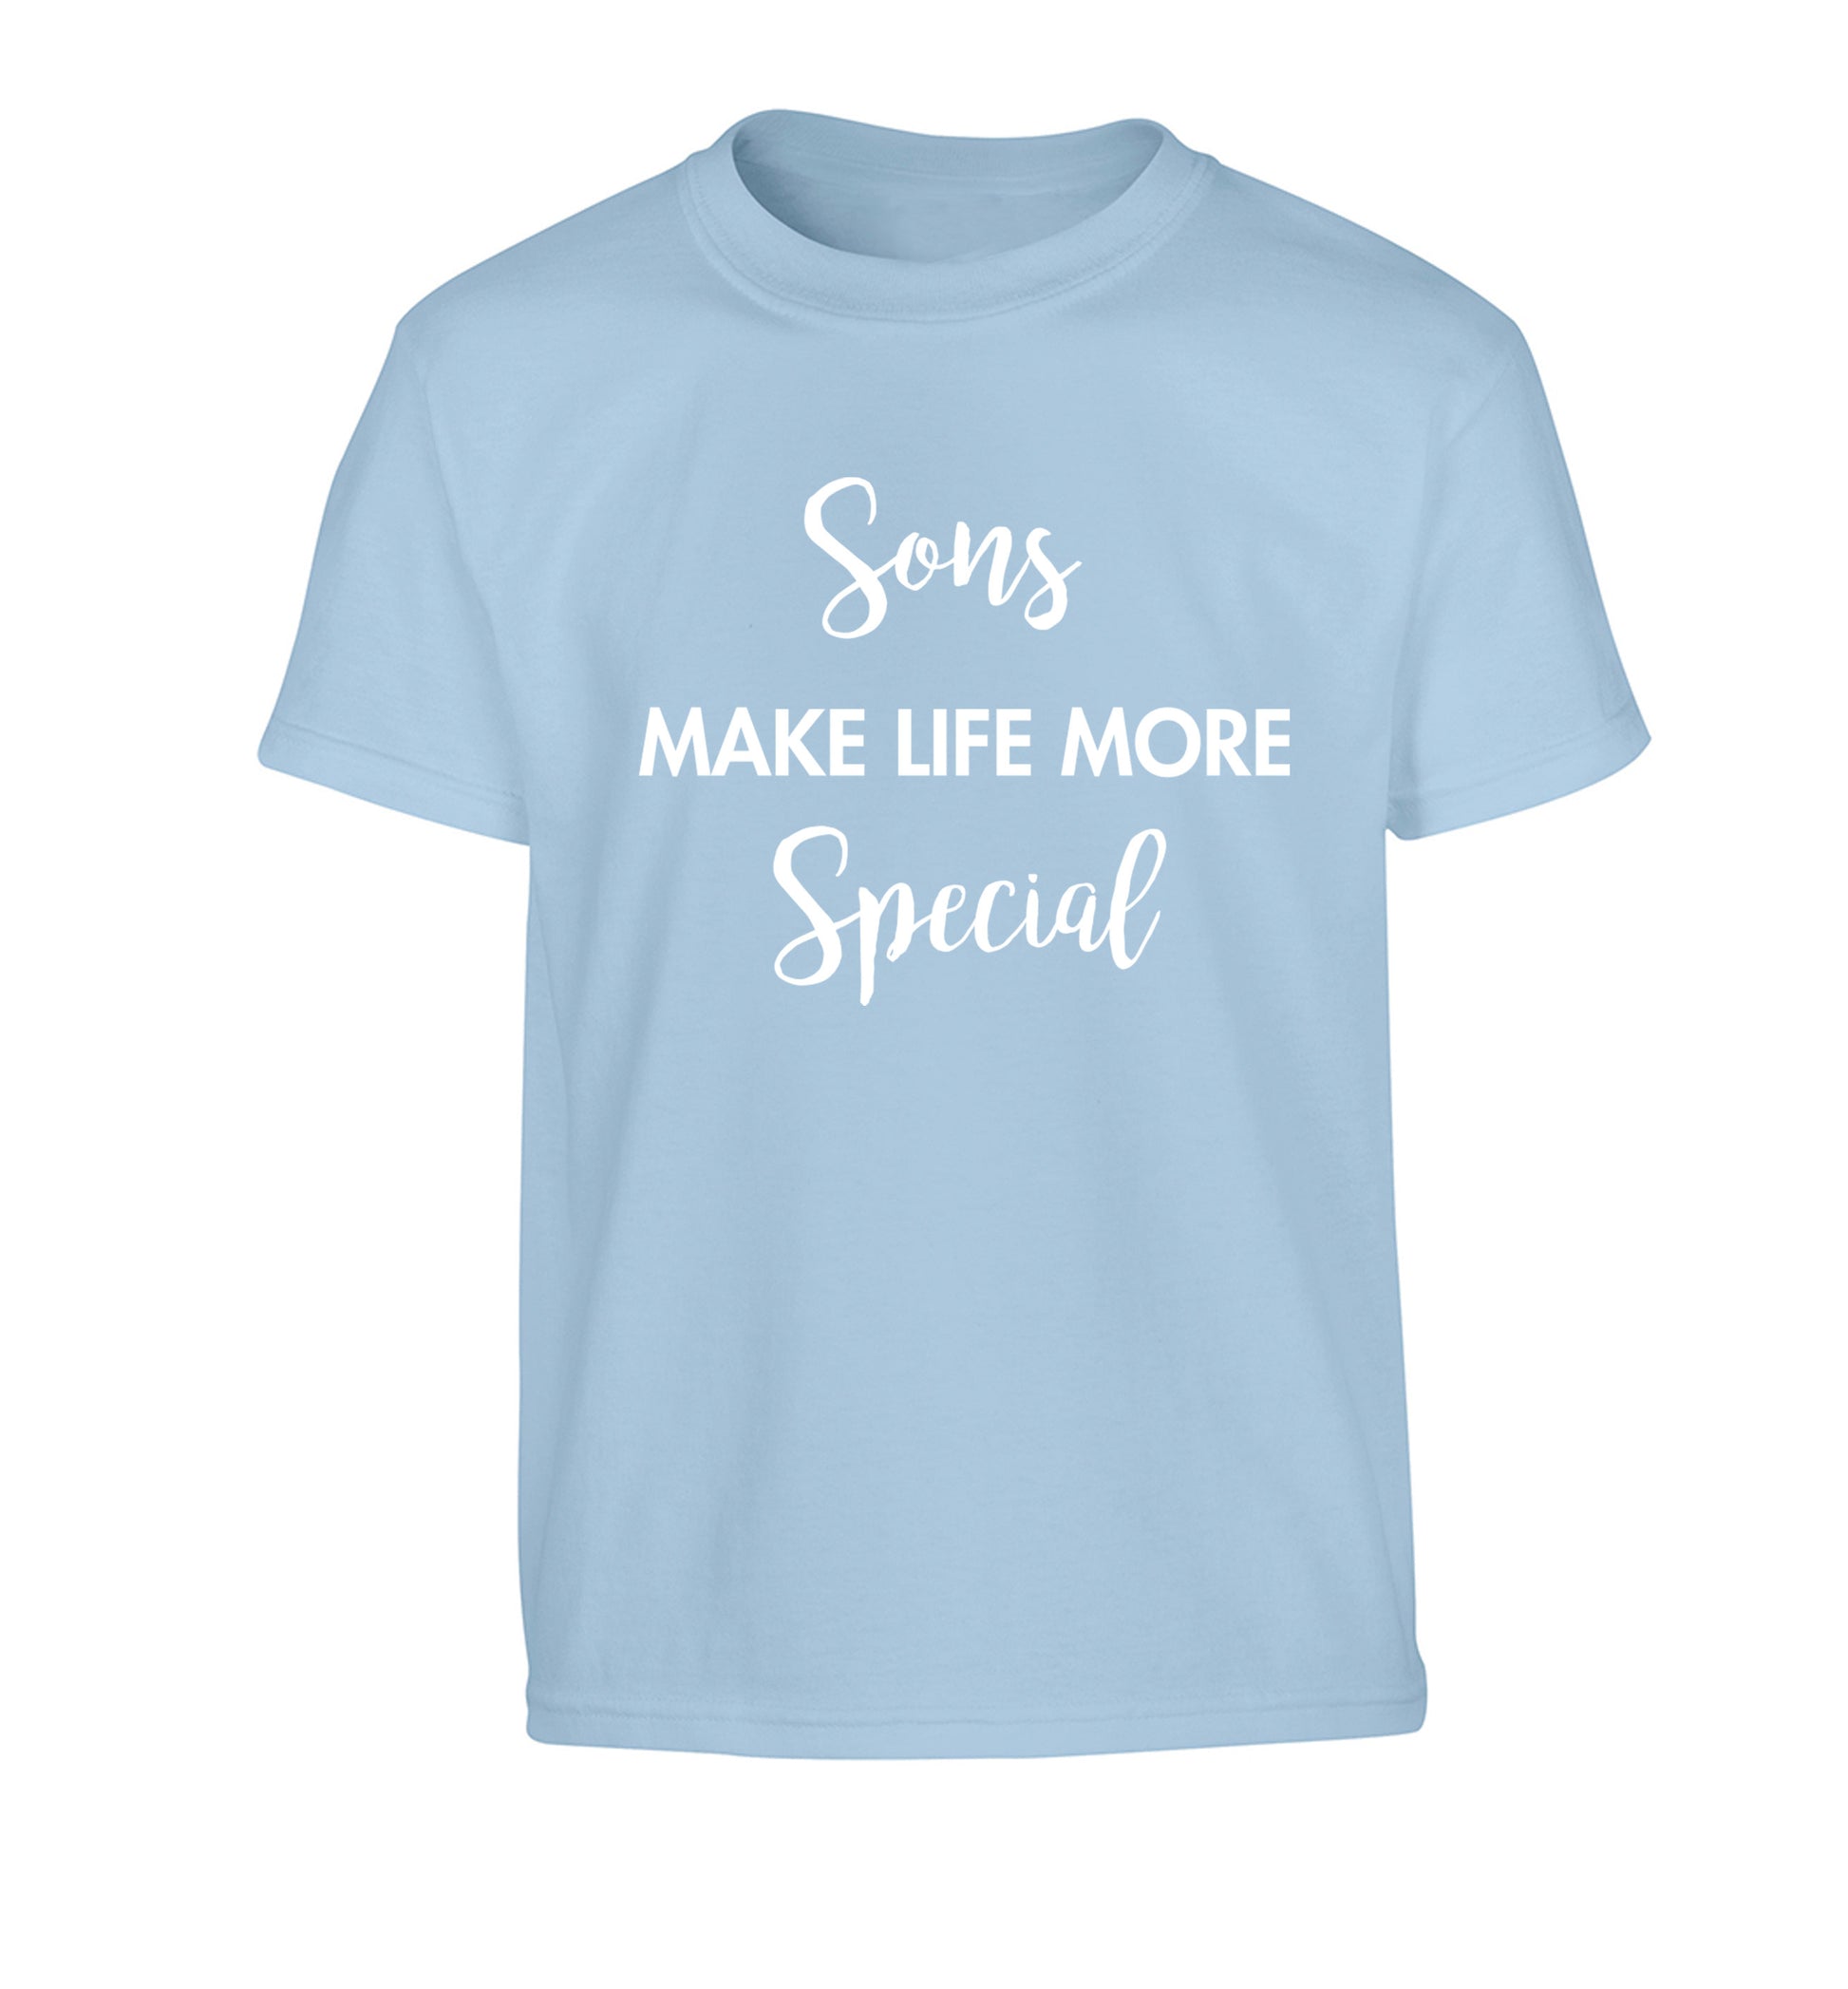 Sons make life more special Children's light blue Tshirt 12-14 Years